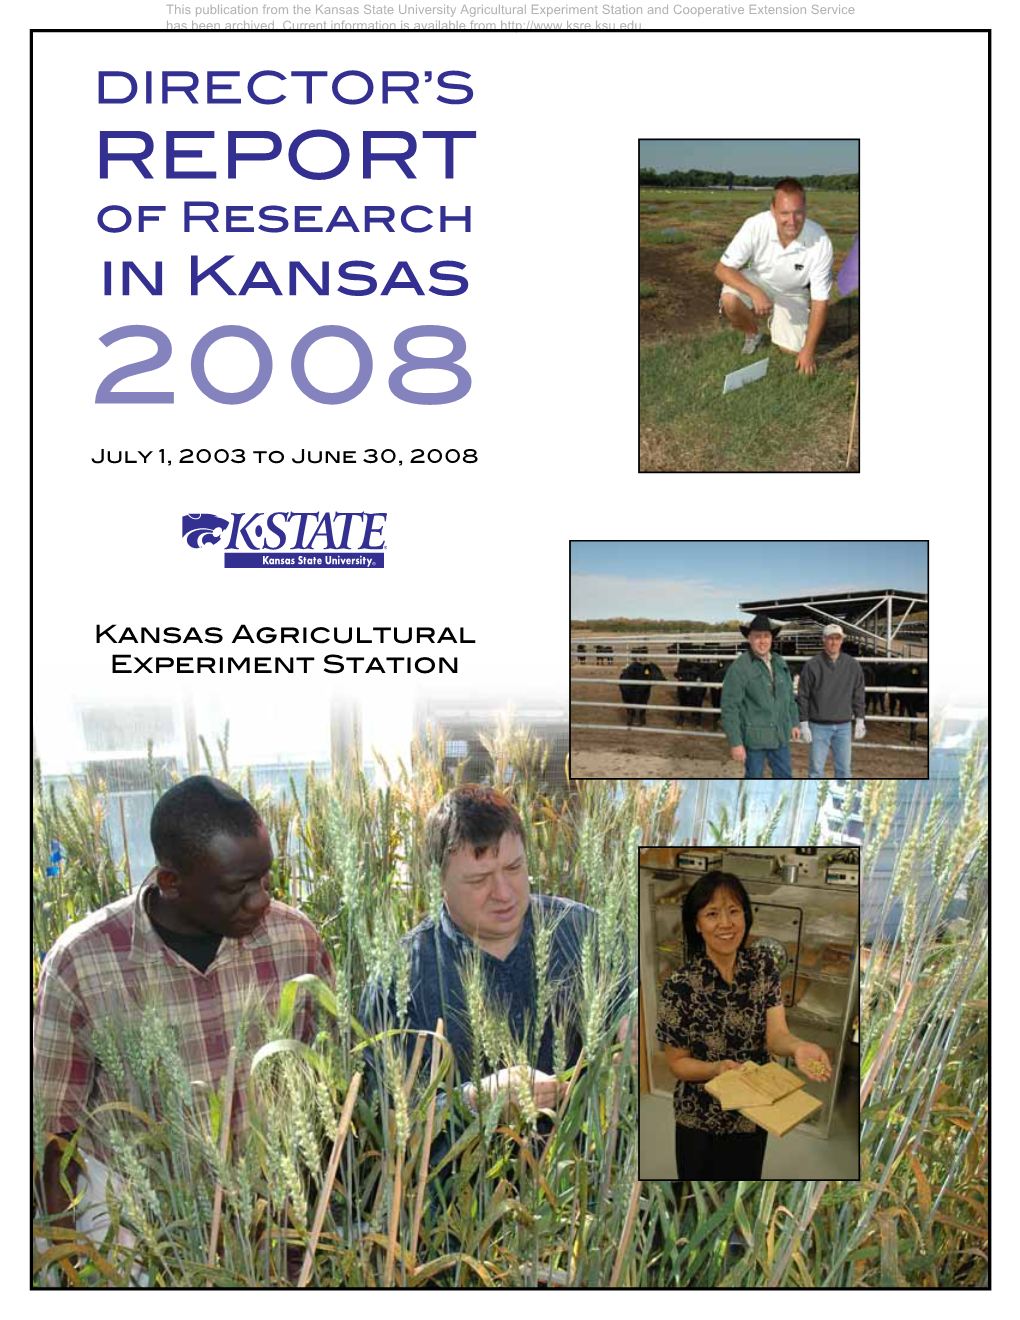 Director's Report of Research in Kansas 2008, July 1 2003 to June